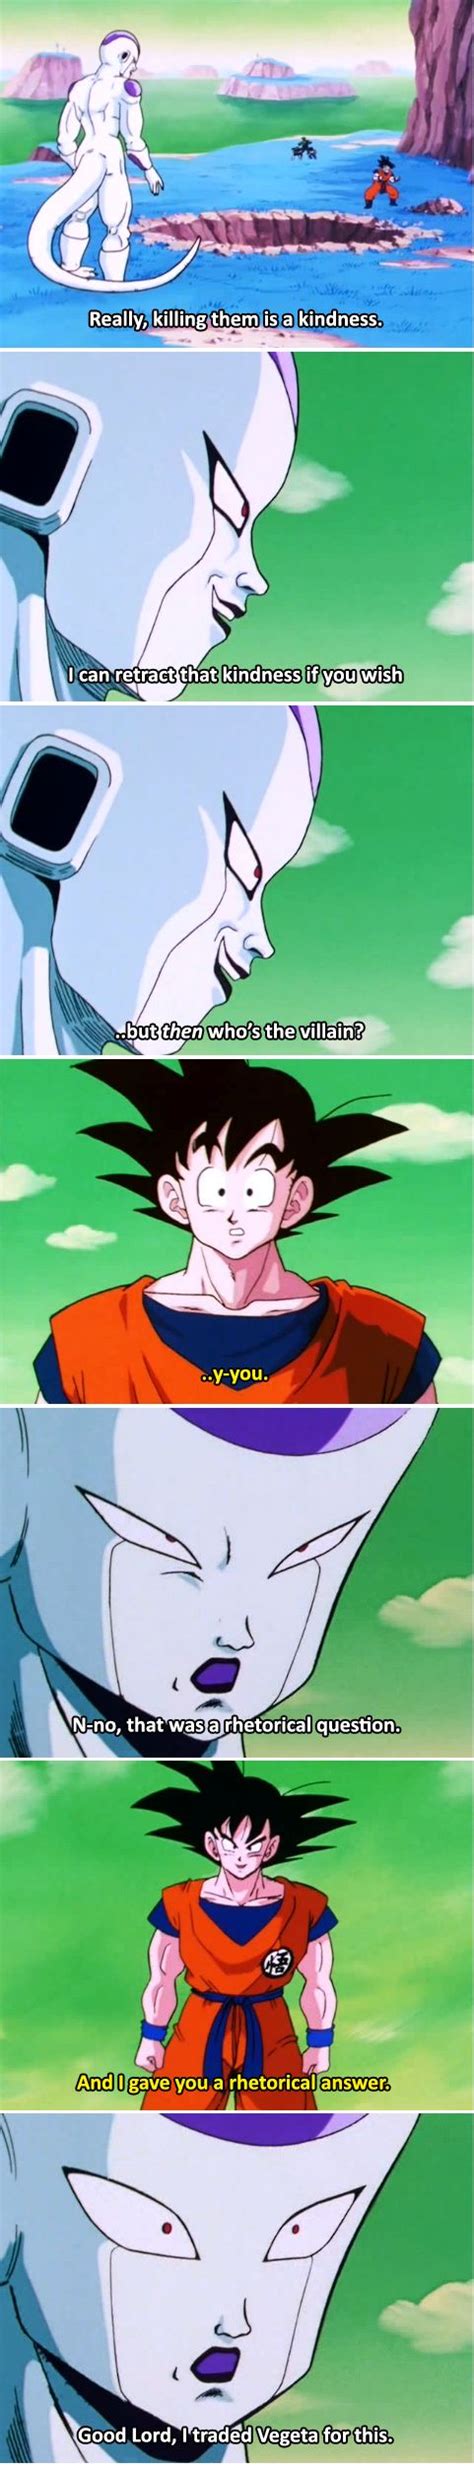 This abridged series is one of the most successful with frieza badly wounded goku shows him some kindness only for frieza to throw it back in his face forcing goku to finally put an end to him. Smart move, Goku... | Anime dragon ball super, Anime ...